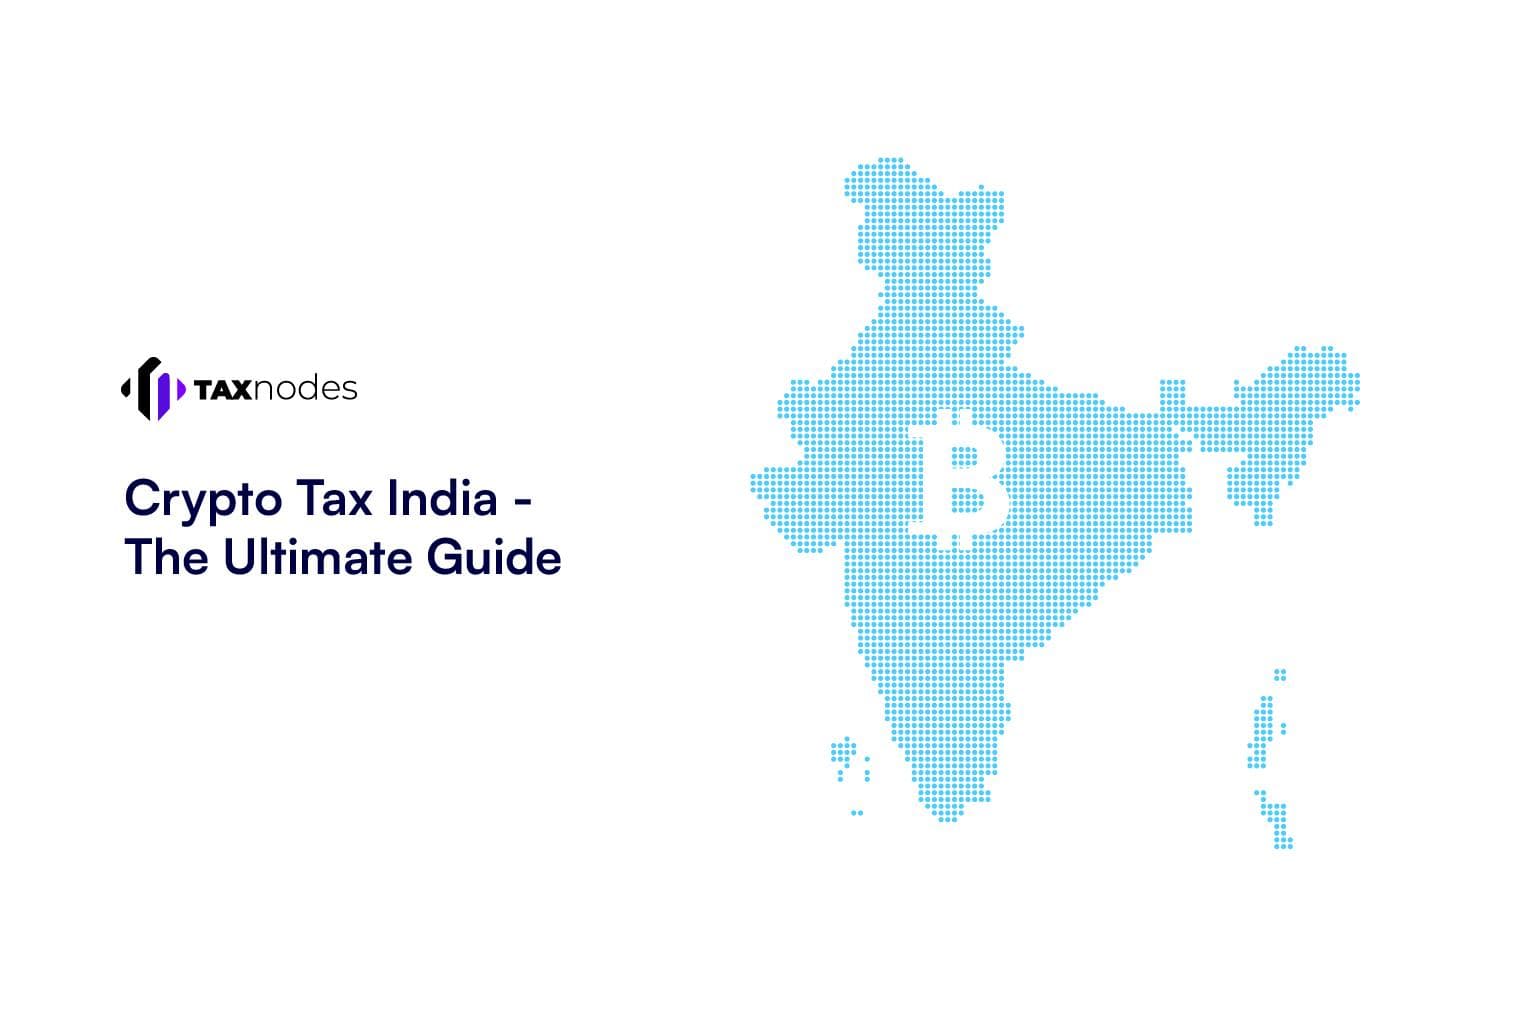 Crypto tax India: the ultimate guide